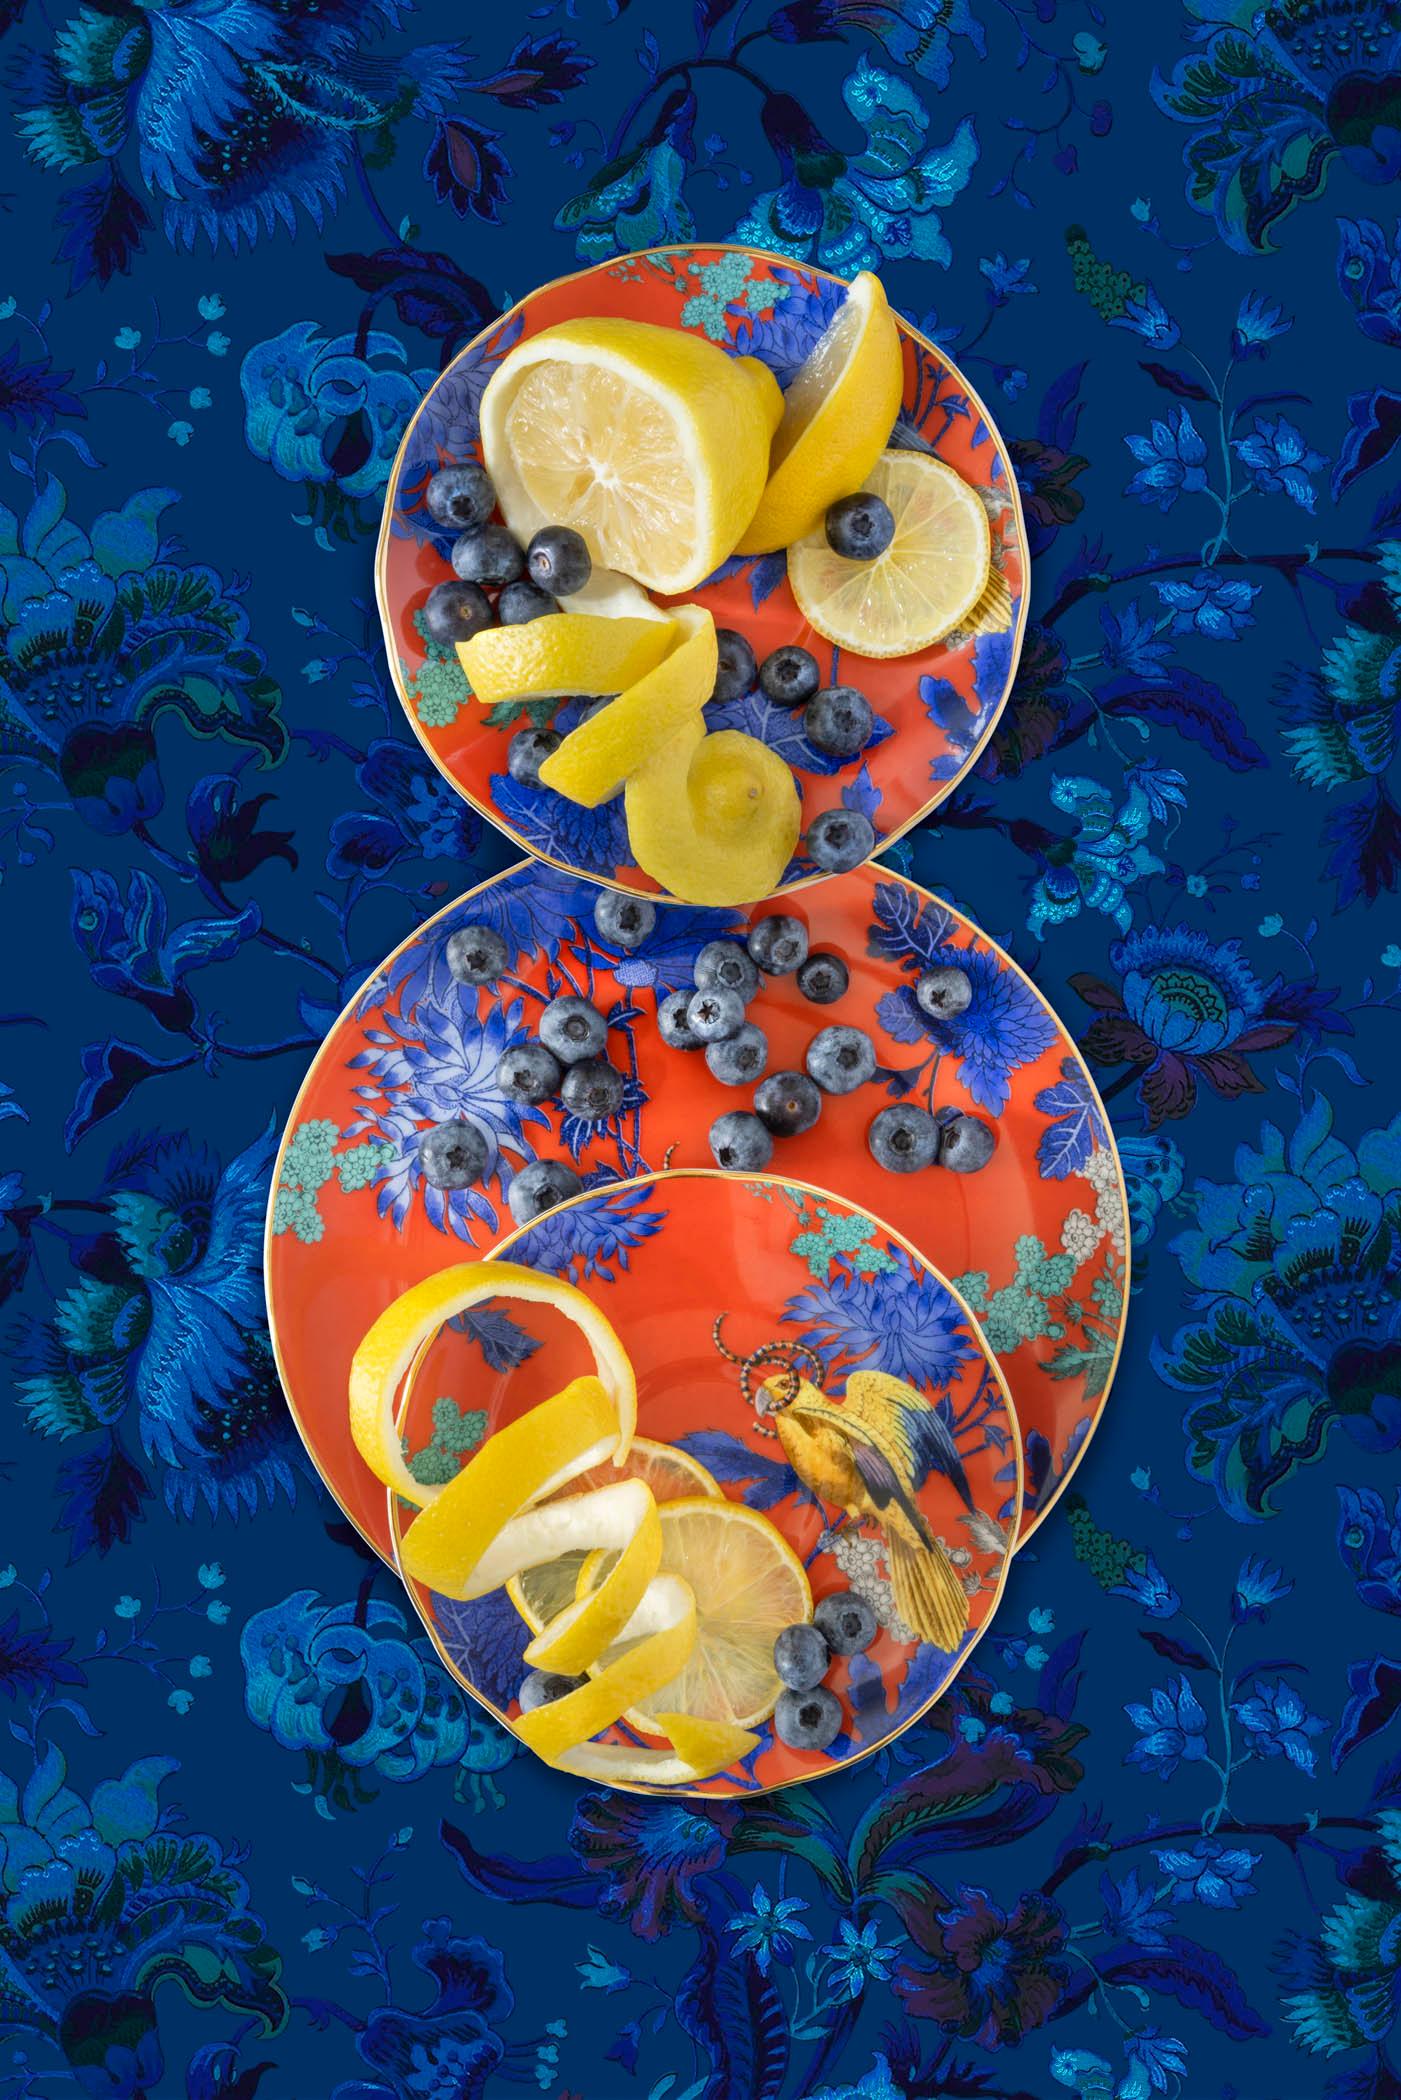 JP Terlizzi Color Photograph - Wedgwood Golden Parrot with Blueberry Lemons, limited edition photograph 